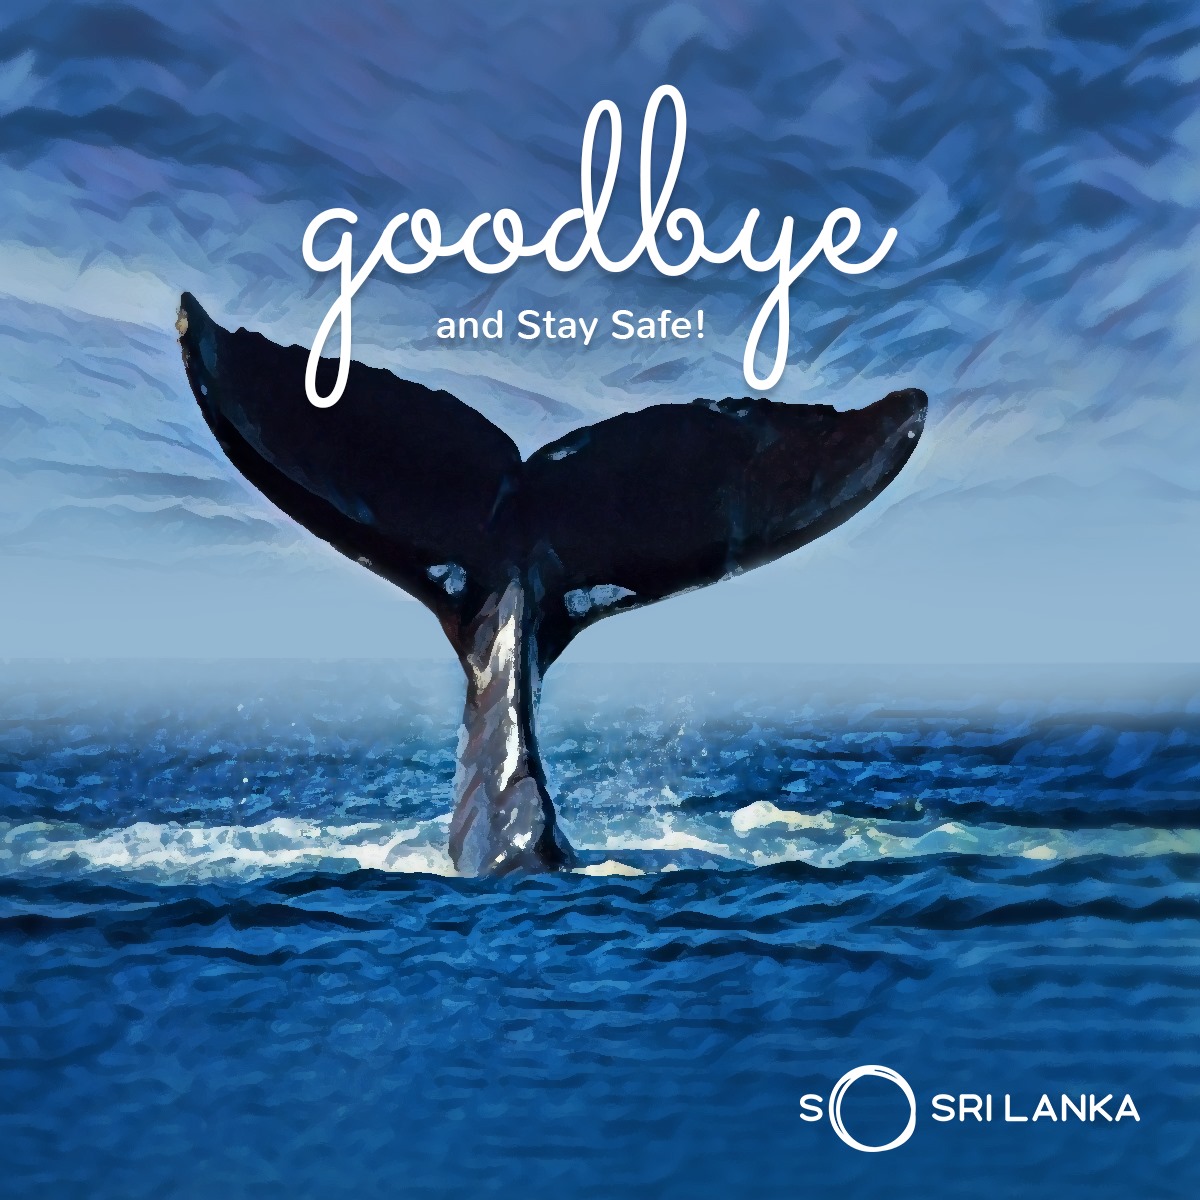 The 120 whales have been successfully rescued and sent back to sea!